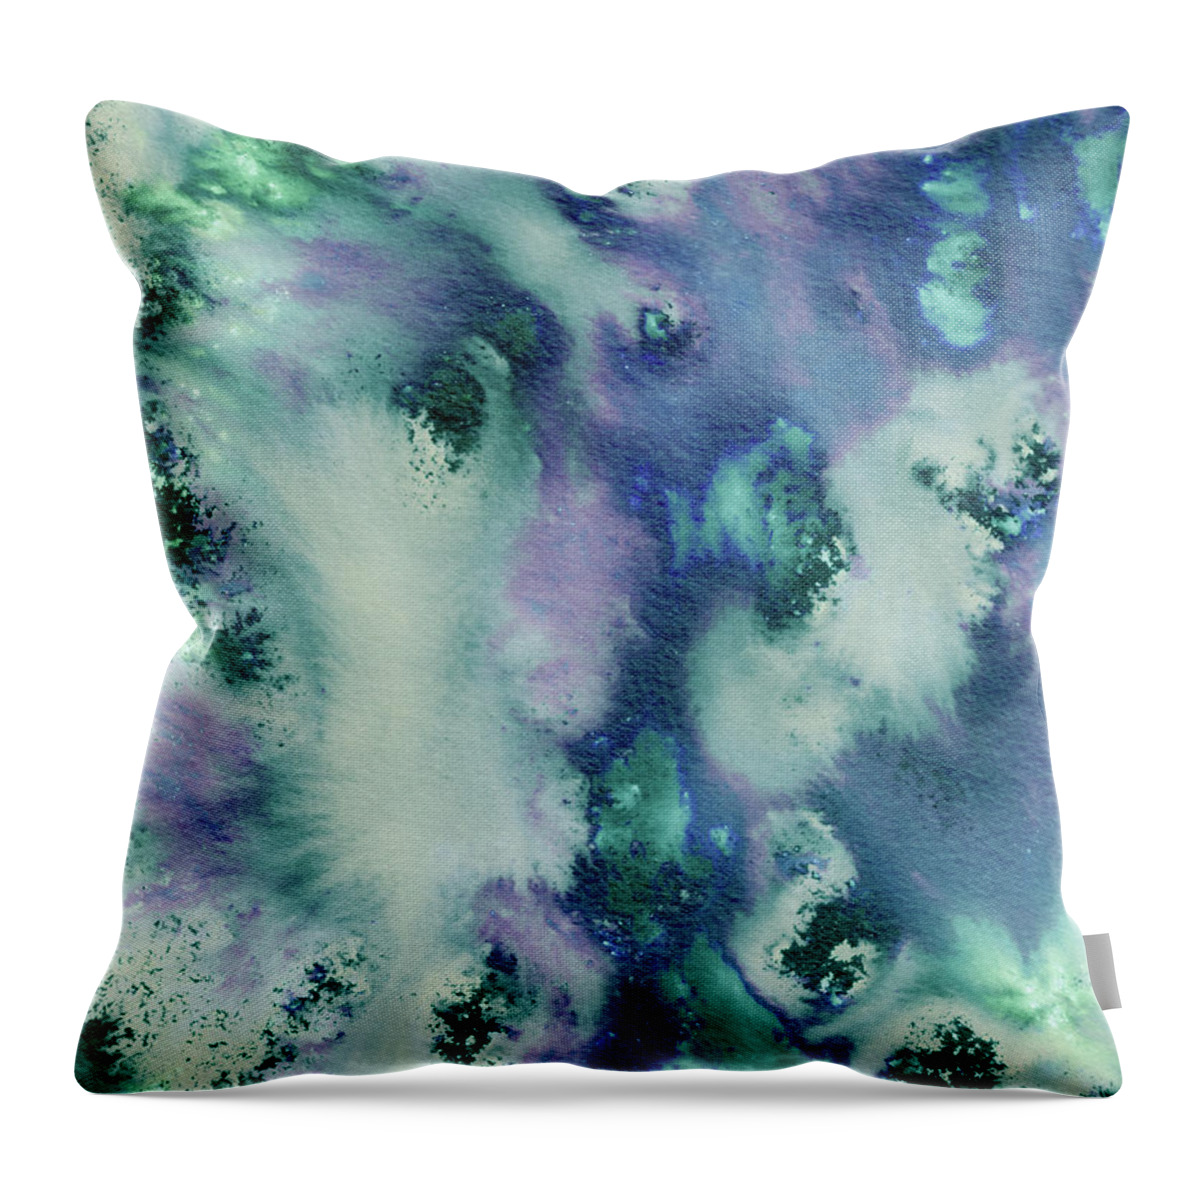 Abstract Watercolor Throw Pillow featuring the painting Calm Cool Soft Abstract Splash Of Blue Watercolor by Irina Sztukowski